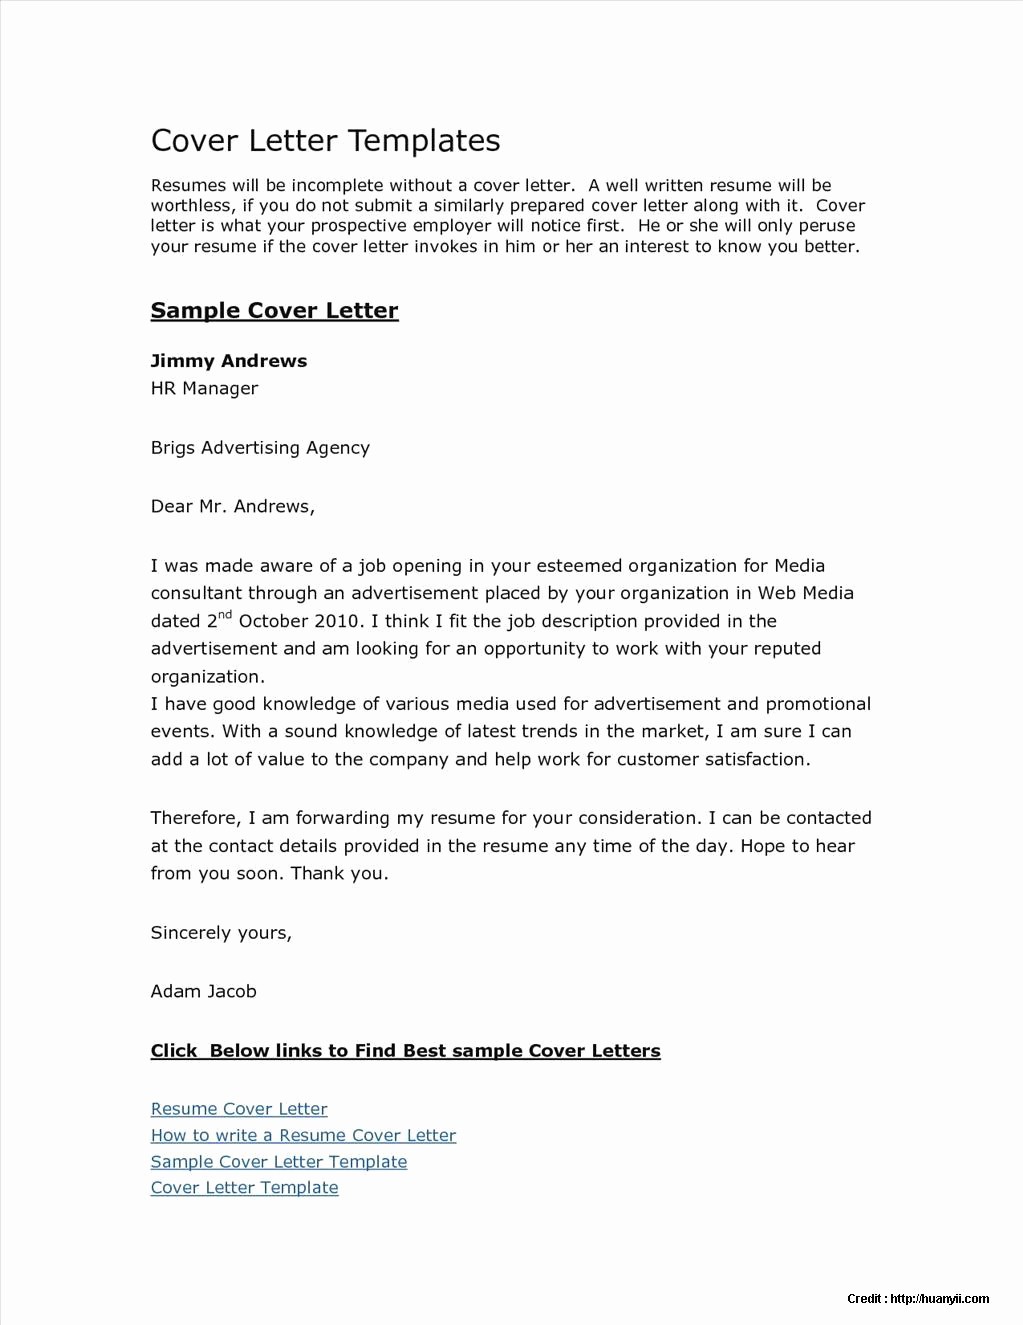 Resume and Cover Letter Templates Unique Free Cover Letter Templates Microsoft Download Cover